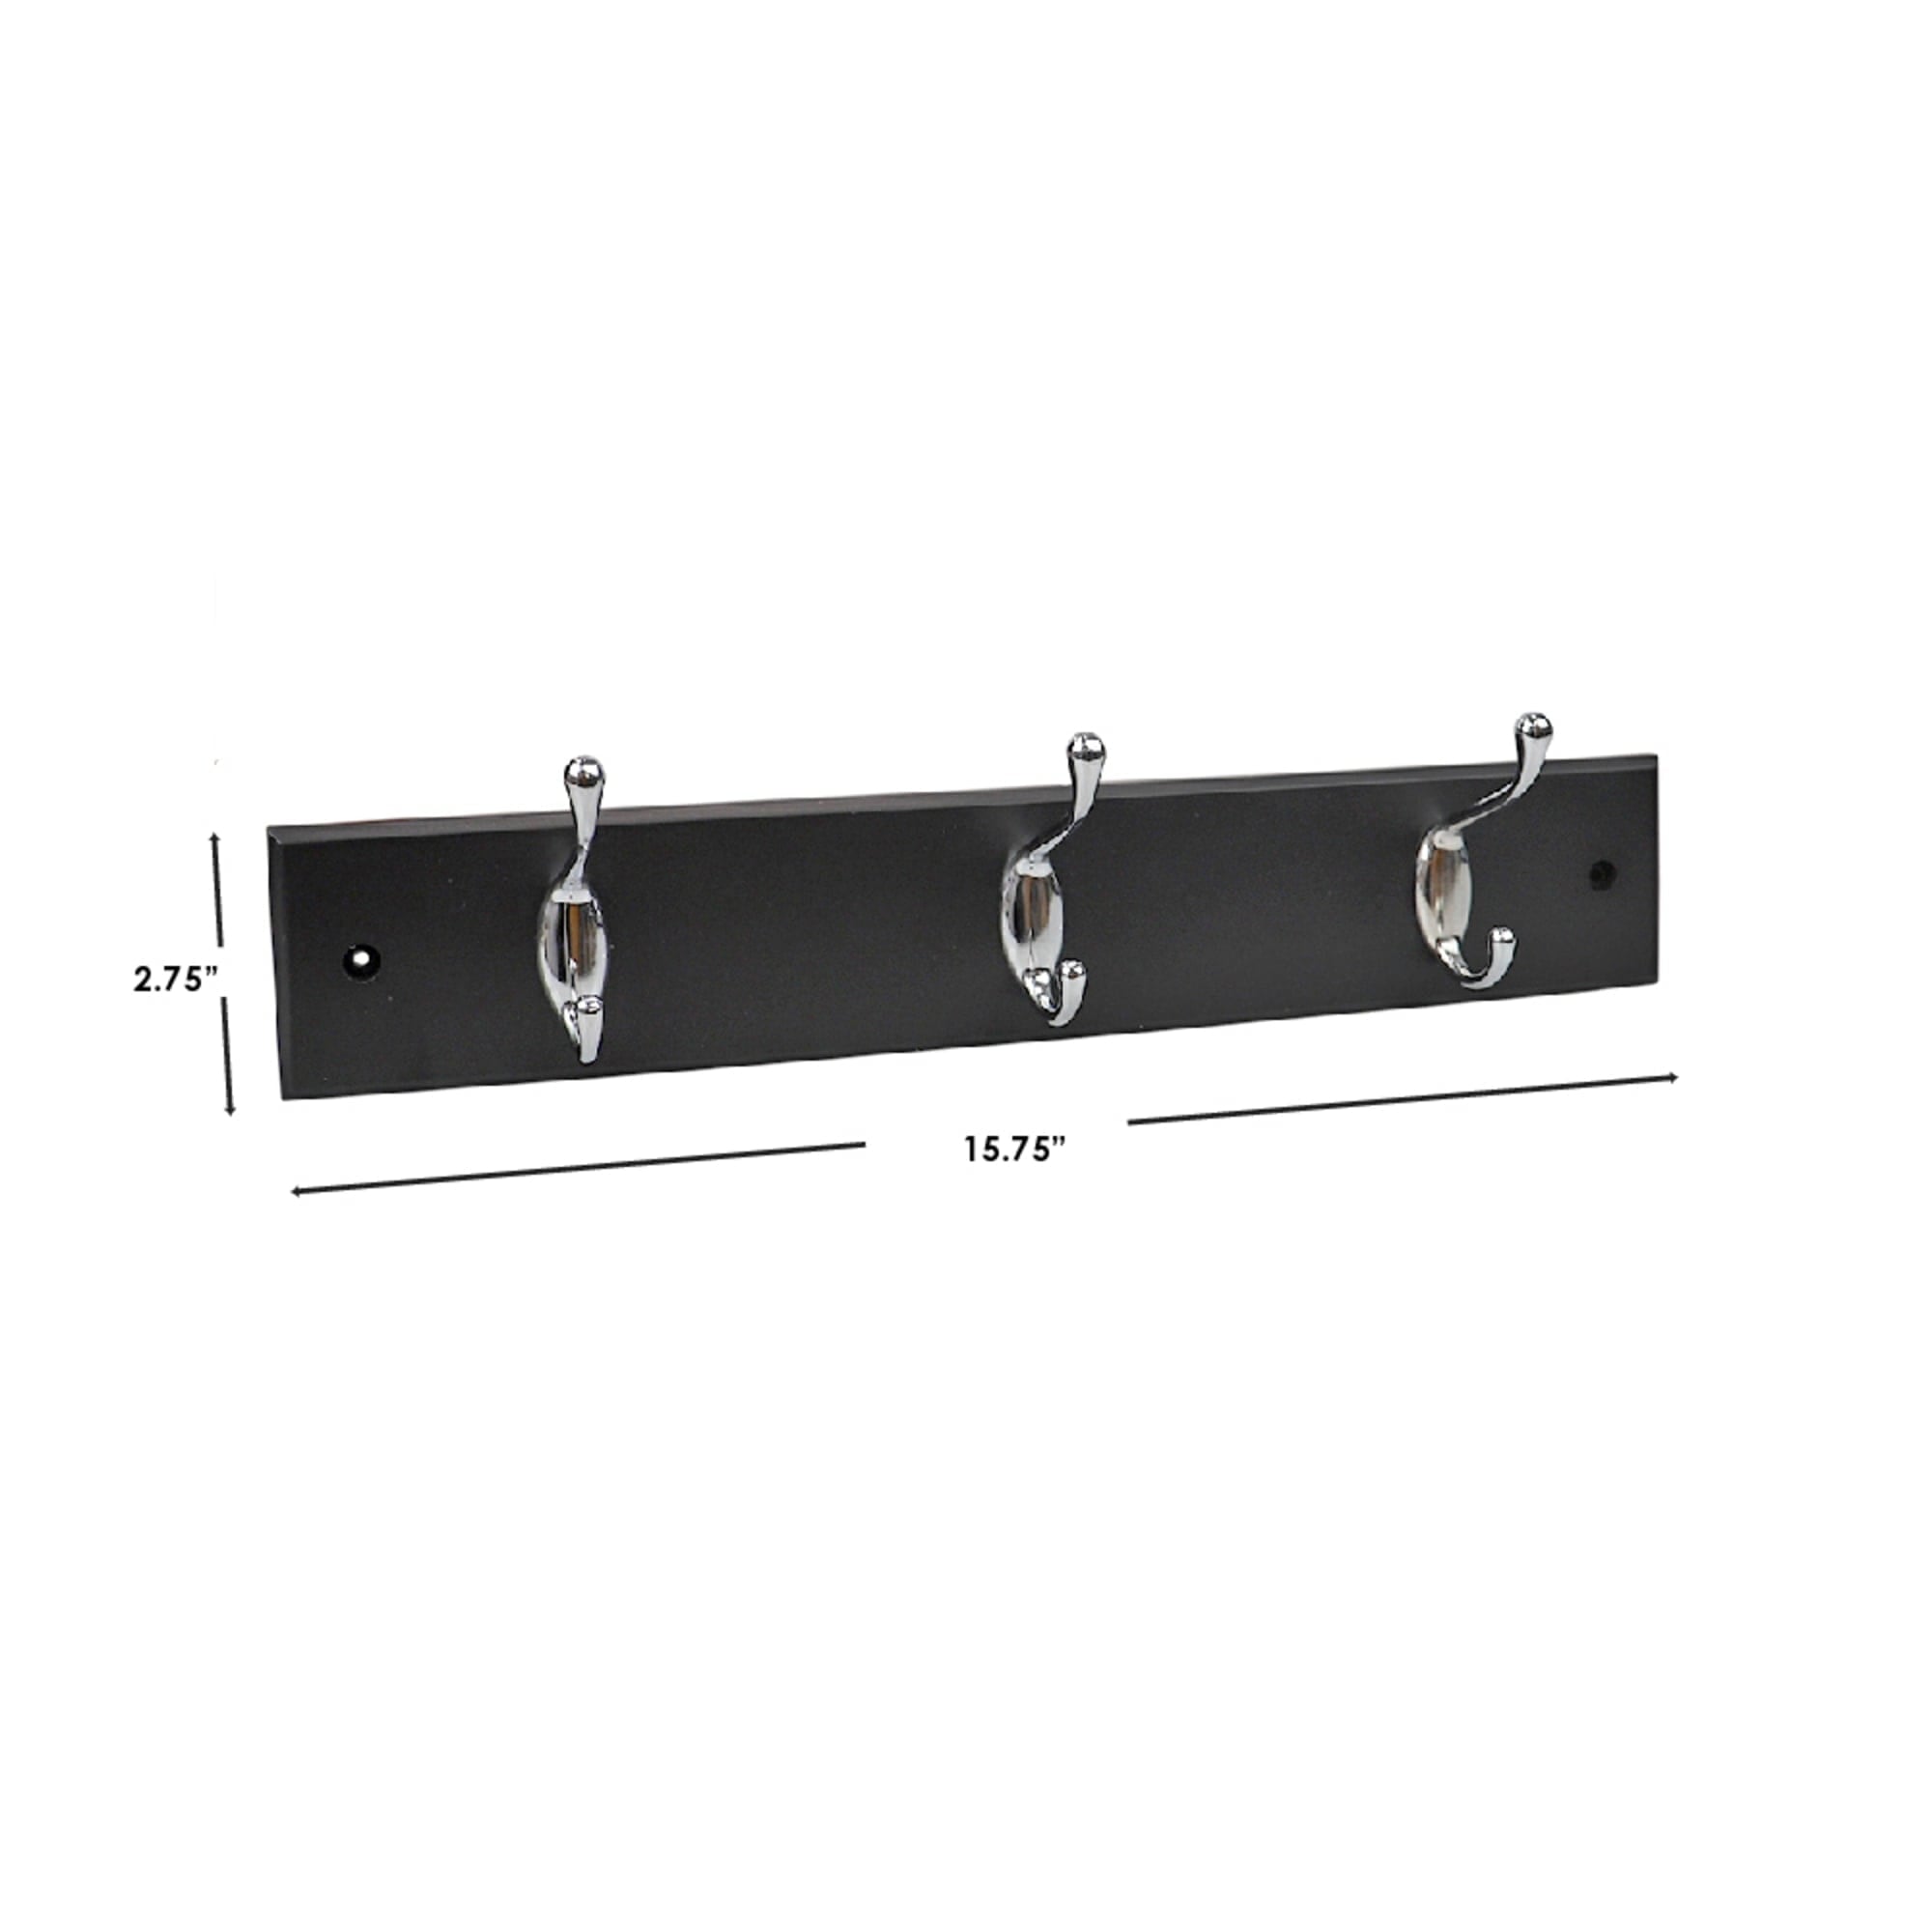 Home Basics 3 Double Hook Wall Mounted Hanging Rack, Black $8.00 EACH, CASE PACK OF 12